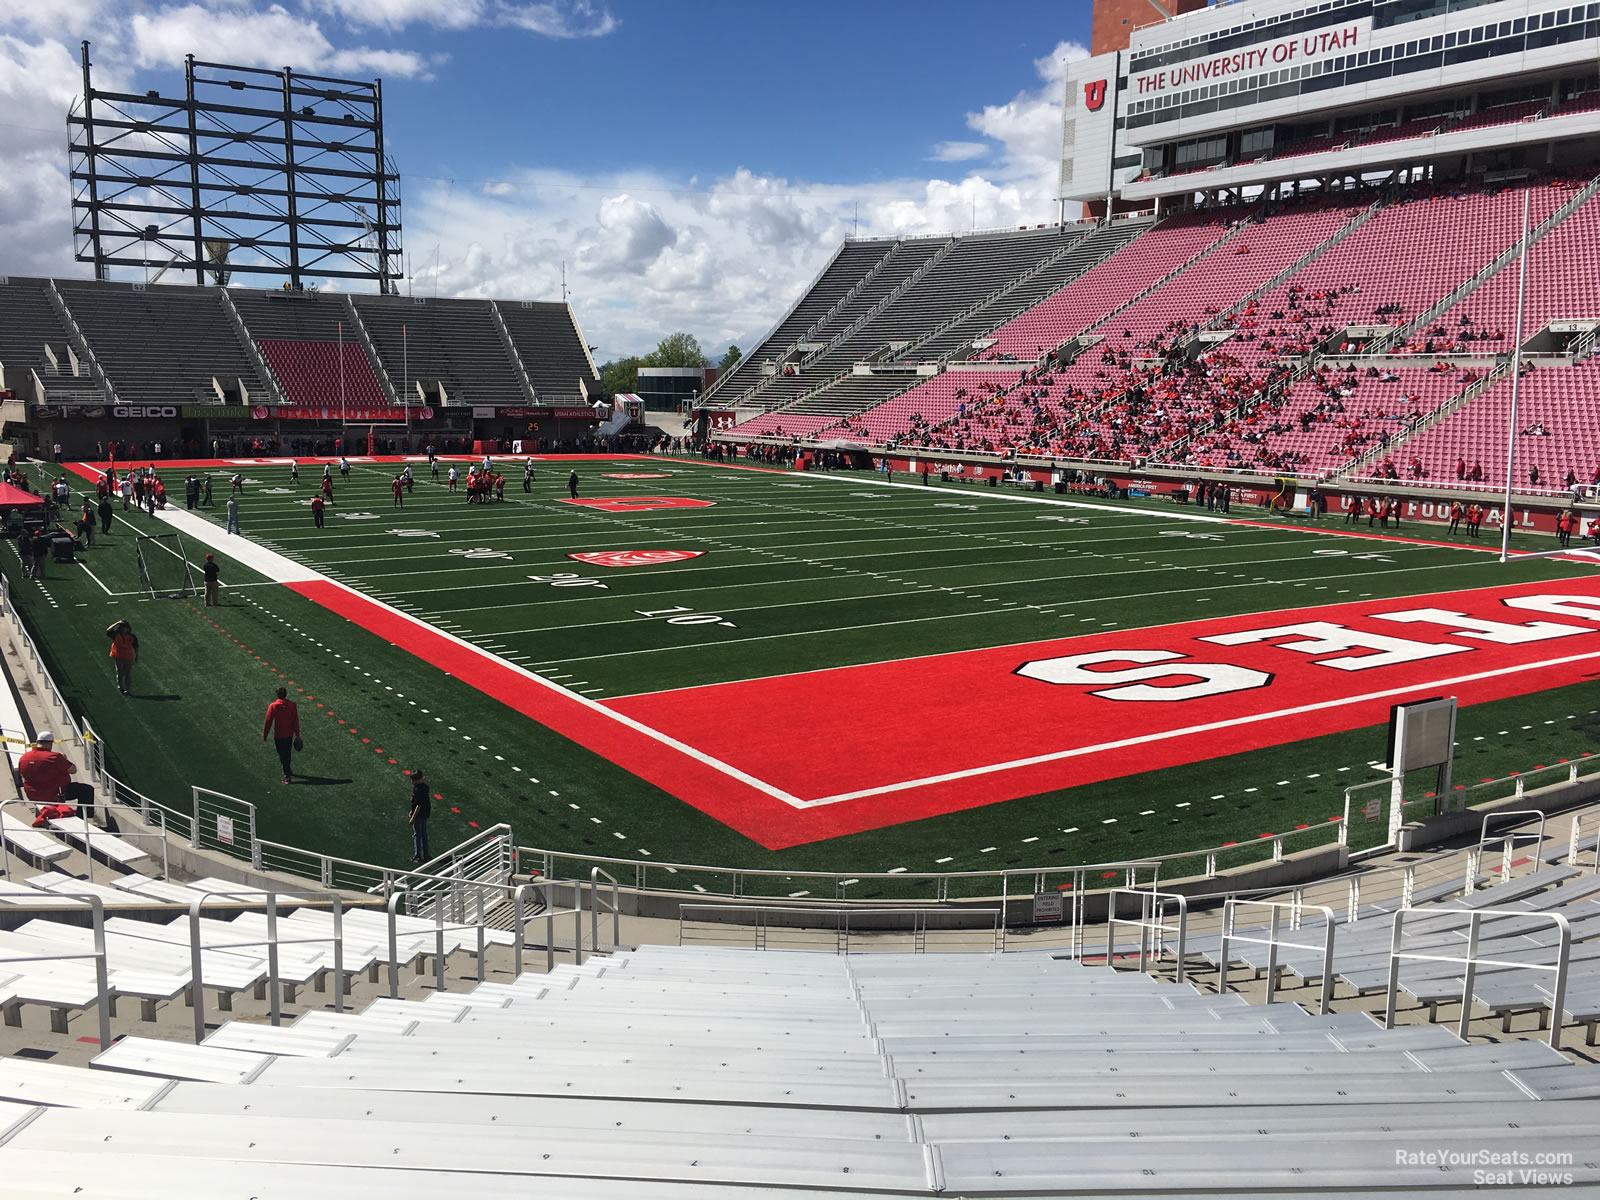 section n27, row 20 seat view  - rice-eccles stadium